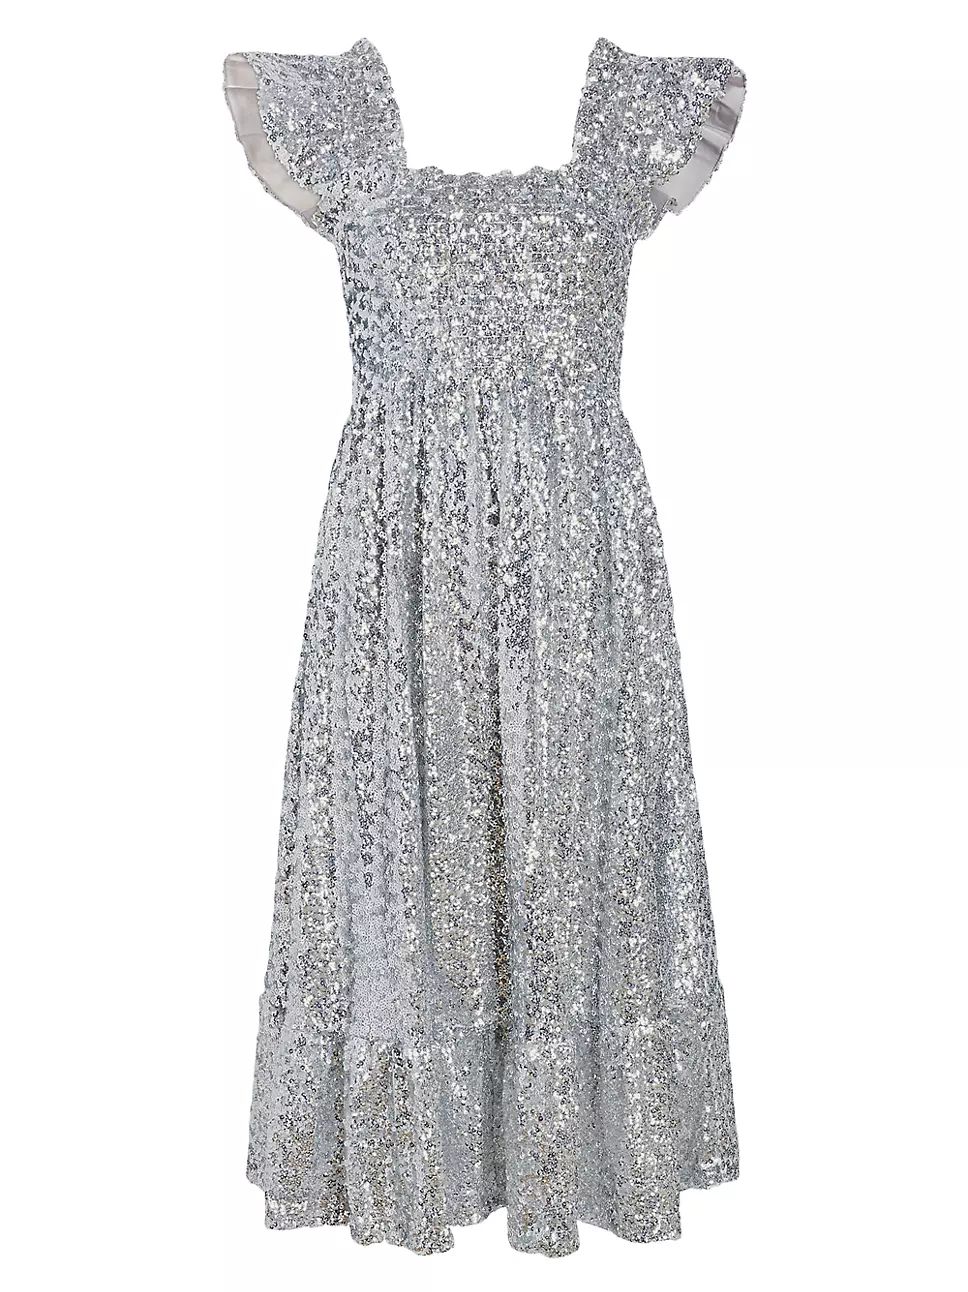 The Collector's Edition Ellie Nap Dress | Saks Fifth Avenue